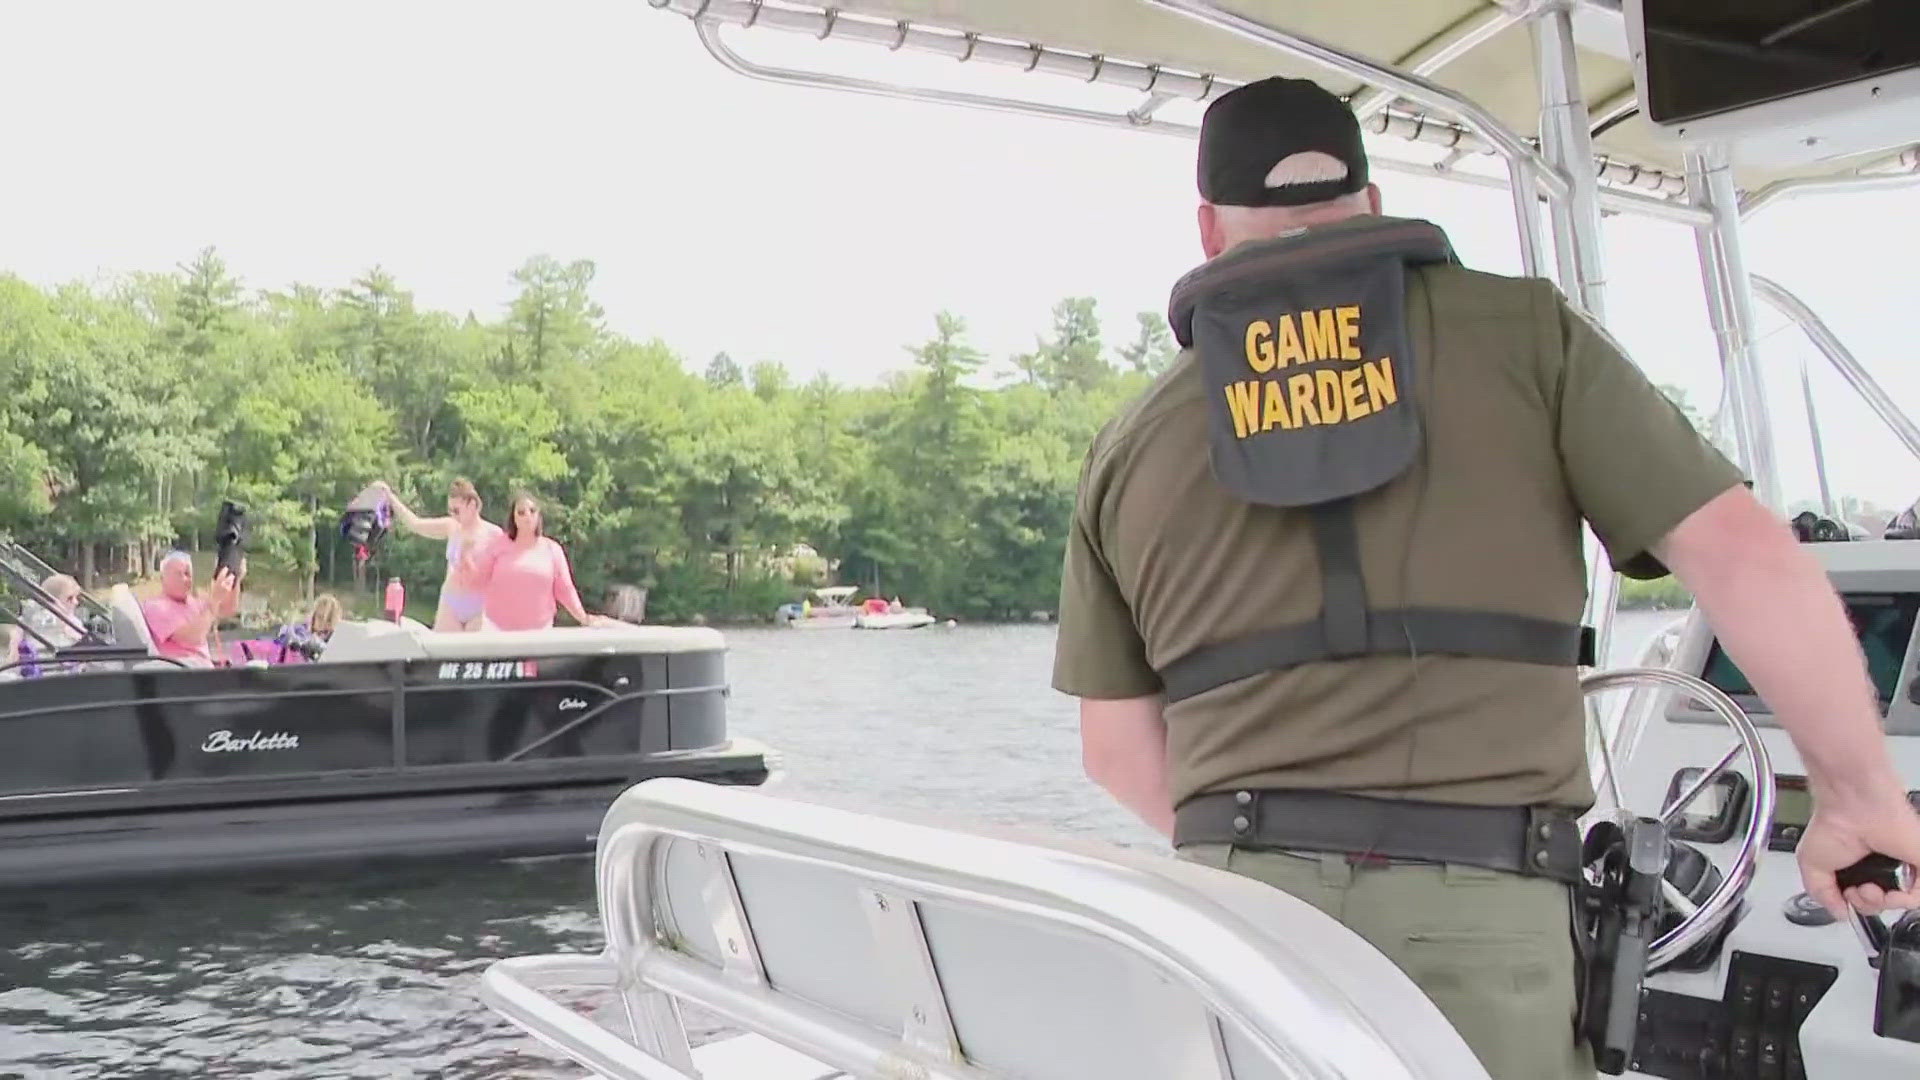 Fourth of July is one of the busiest days on Maine's second biggest lake, which is why agencies across Maine are reminding boaters to stay sober when on the water.